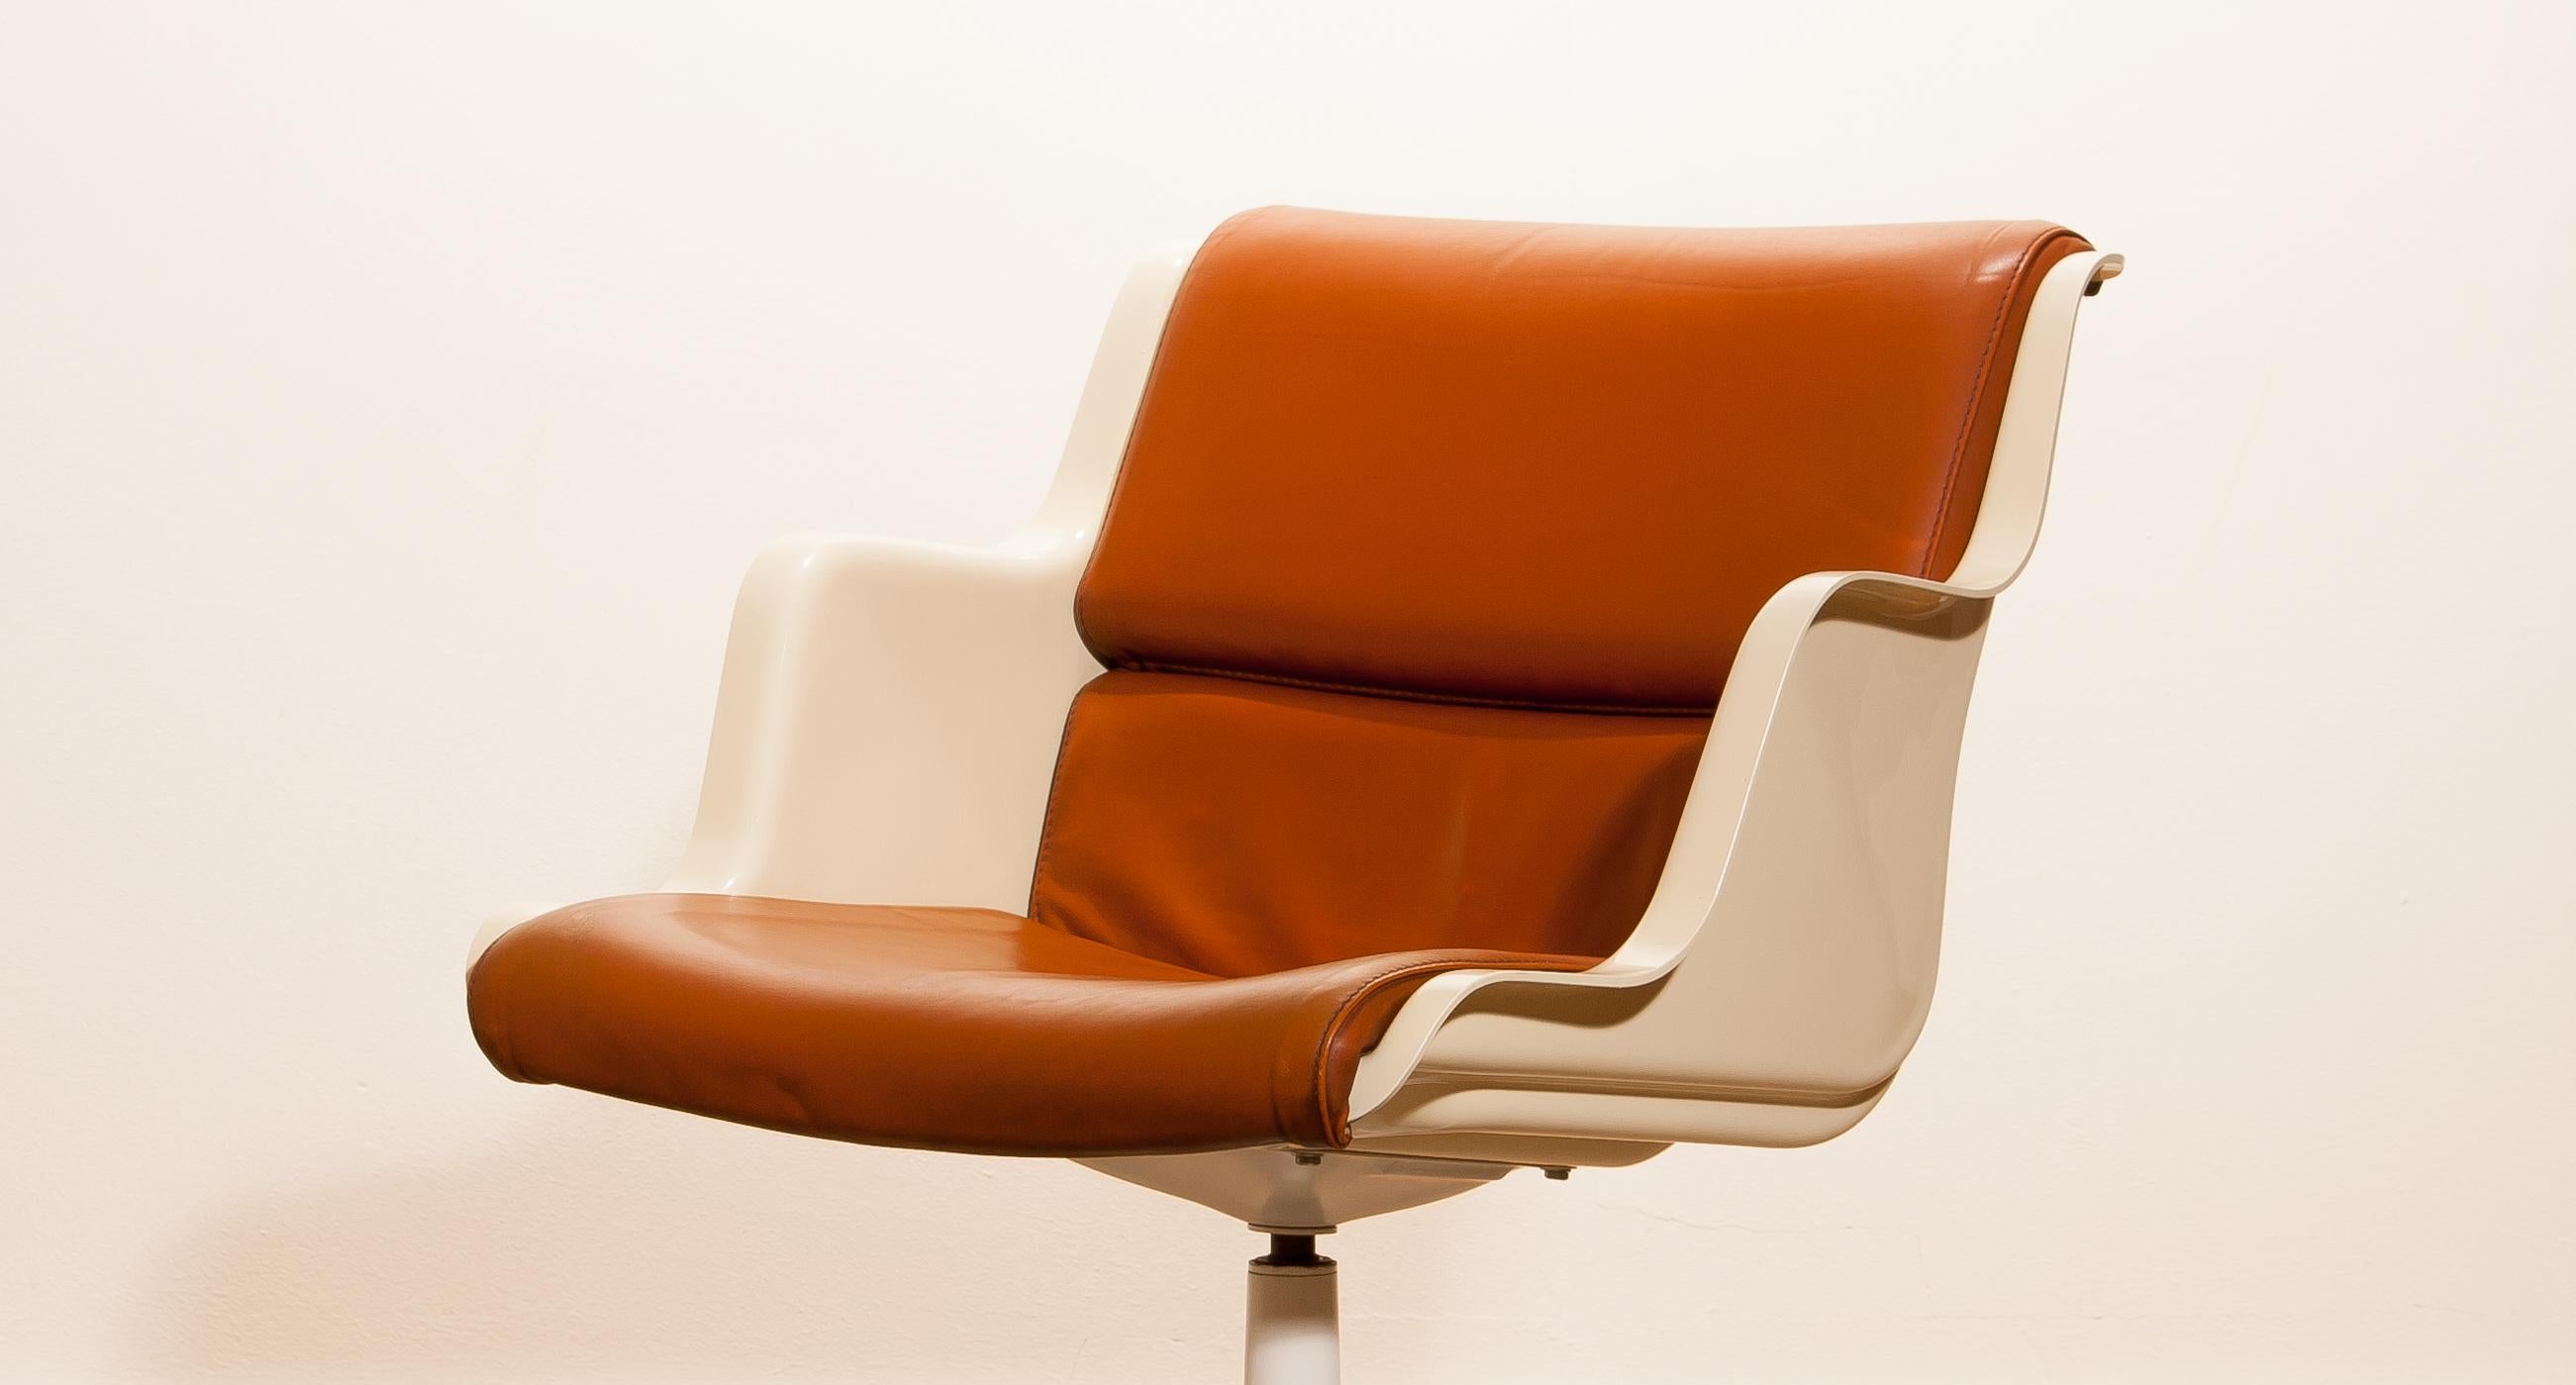 Late 20th Century 1970s, Leather, Fibreglass and Metal Desk Side Chair by Yrjö Kukkapuro for Haimi